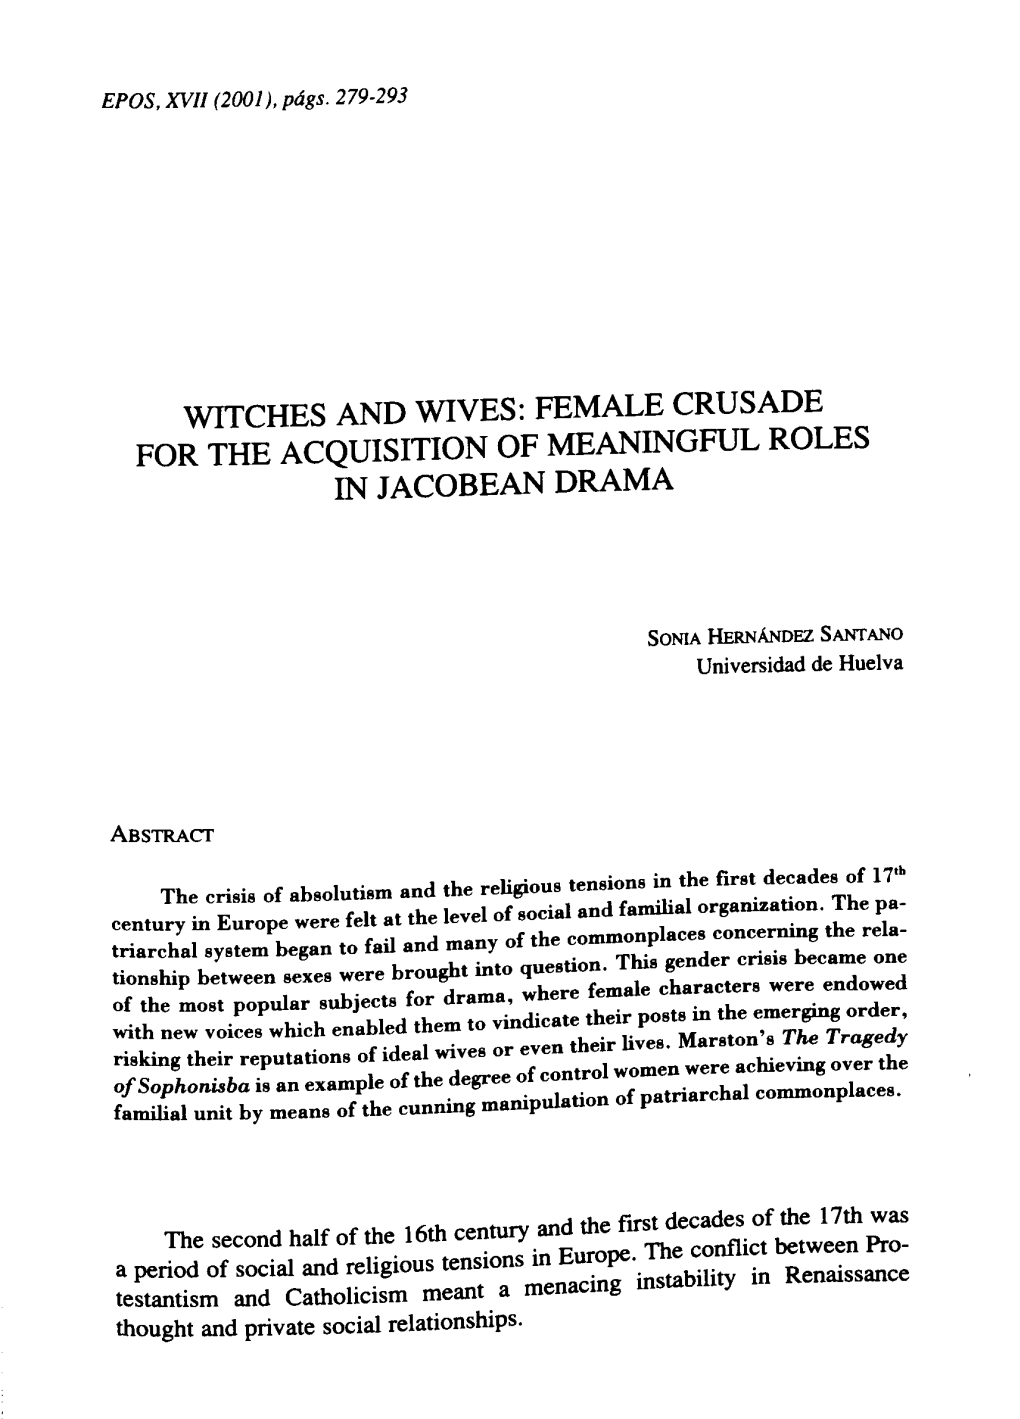 Witches and Wives. Female Crusade for the Acquisition of Meaningful Roles Iln Jacobean Drama